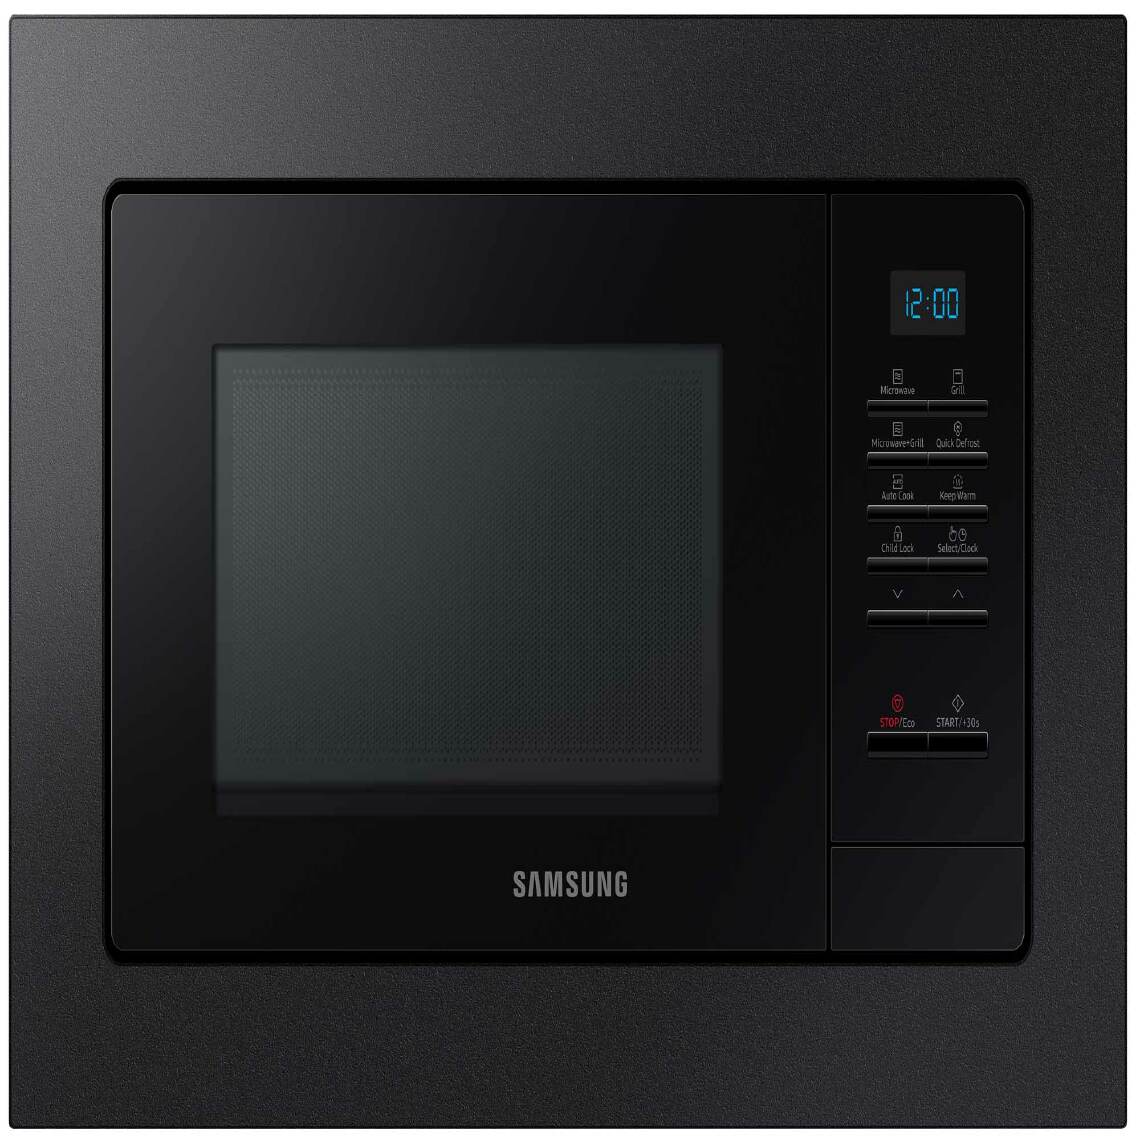 Samsung - Micro ondes Grill Encastrable MG20A7013CB - Four micro-ondes